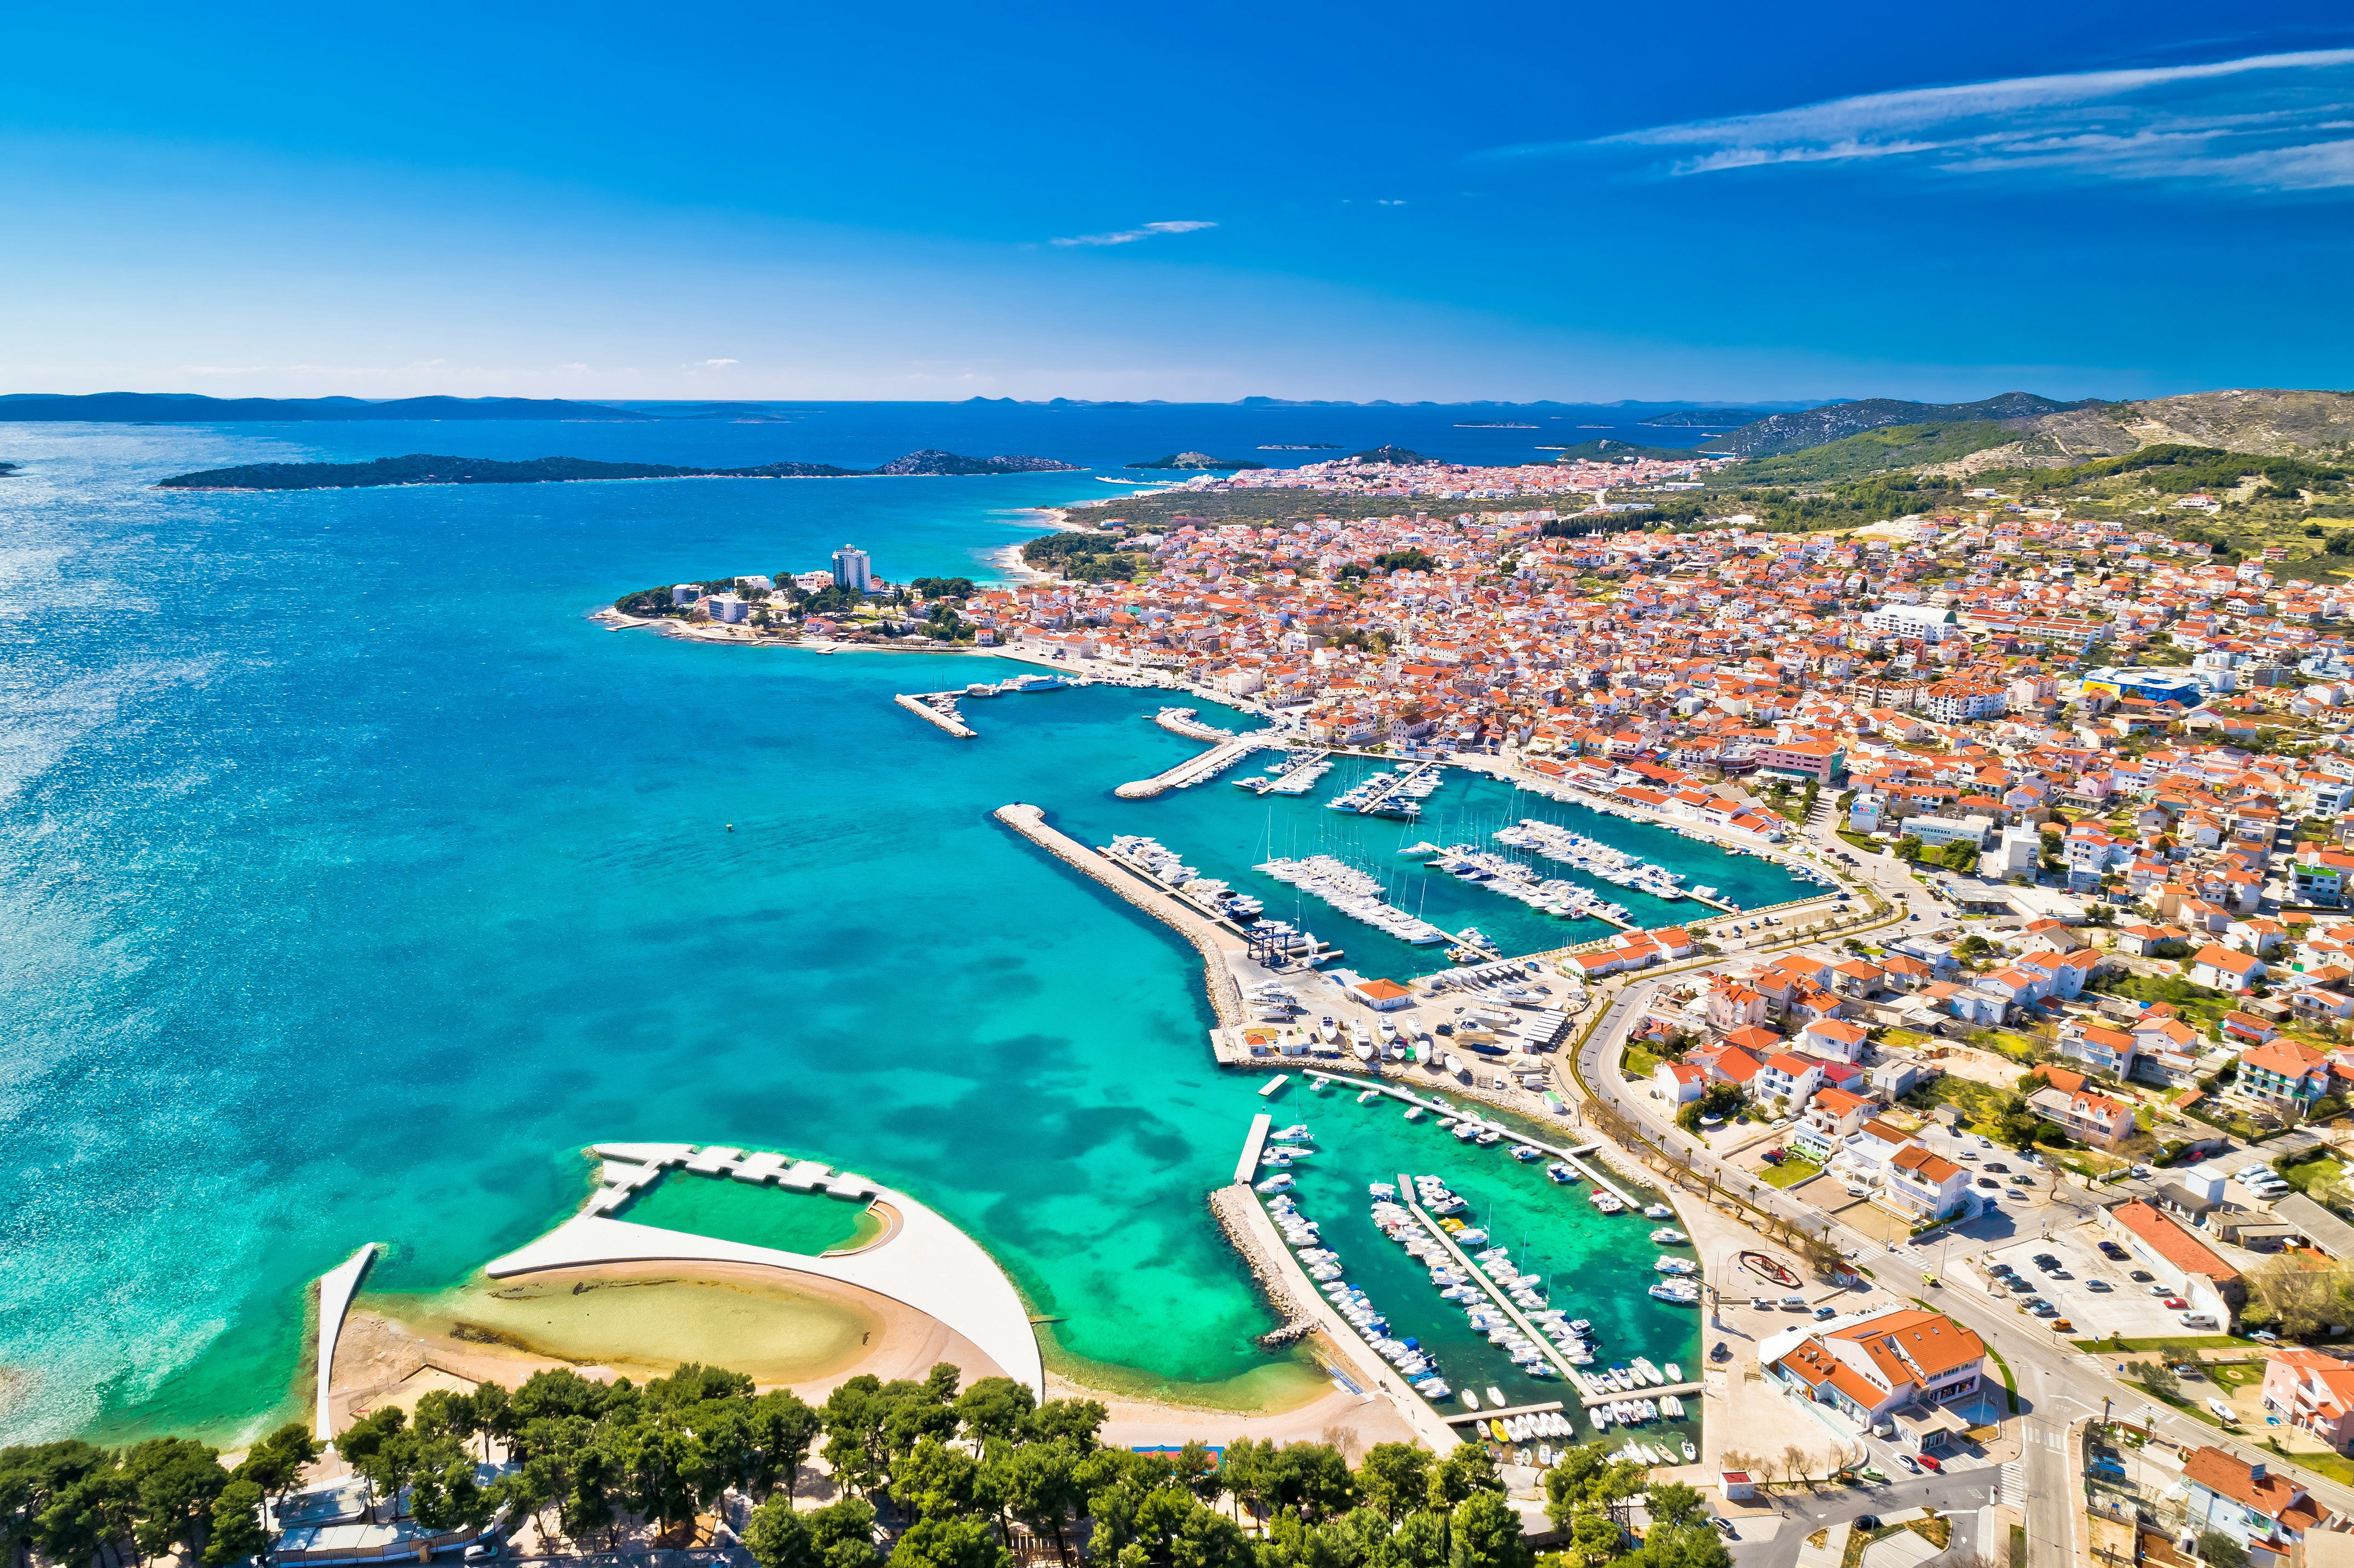 Where to access water, use the services and unwind in Central Dalmatia?